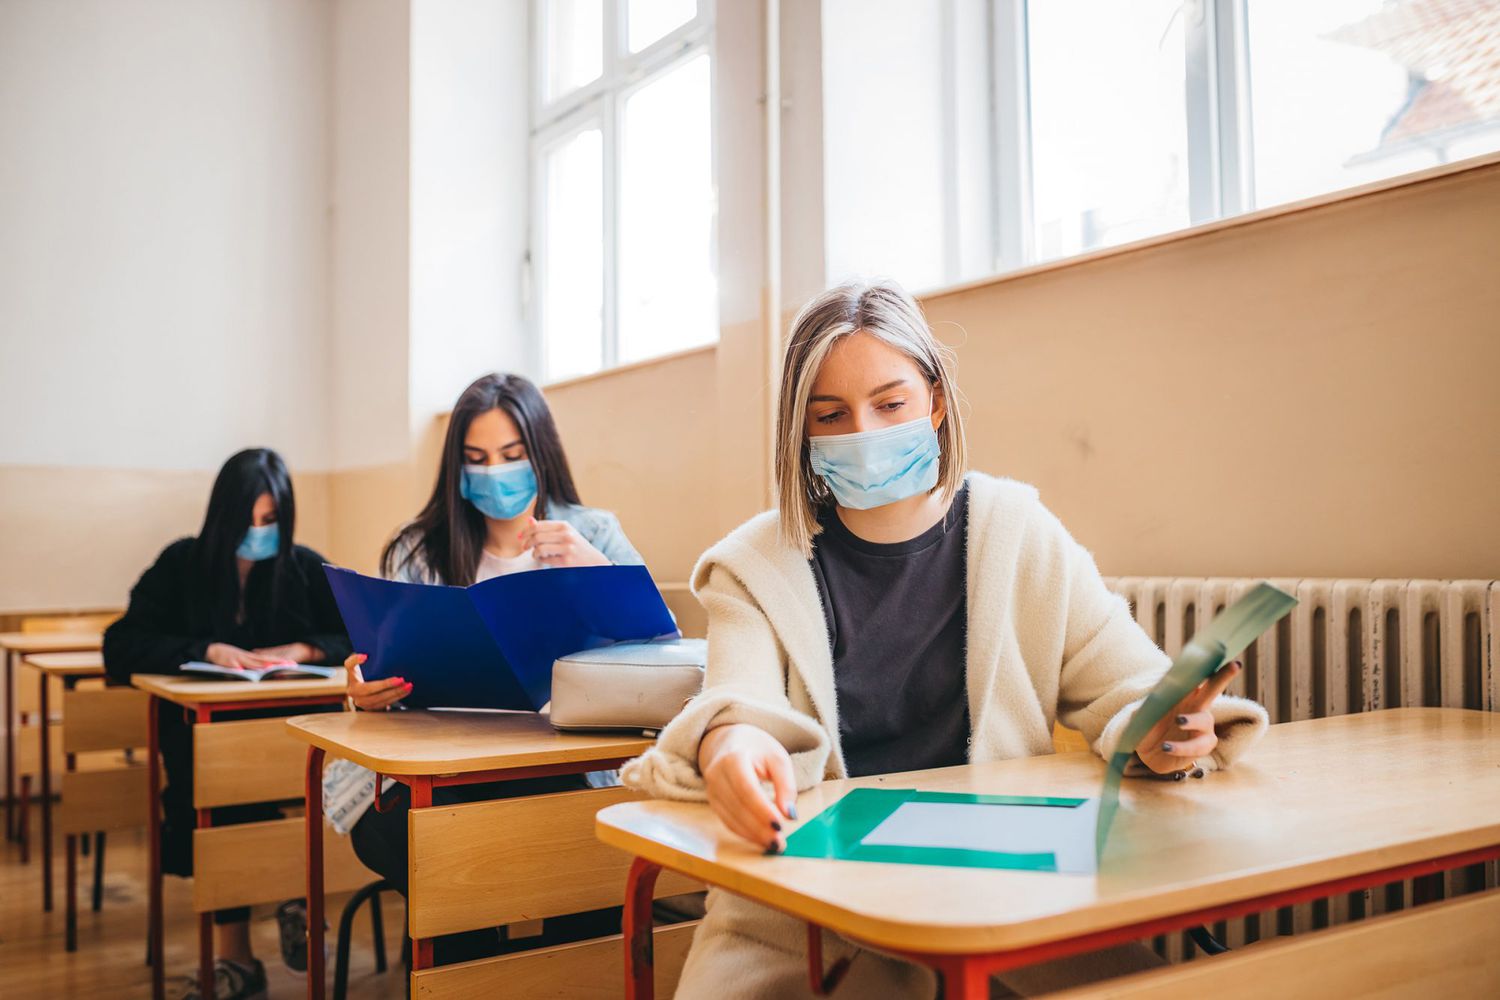 A view of high school students sitting at desks in a classroom with protective masks